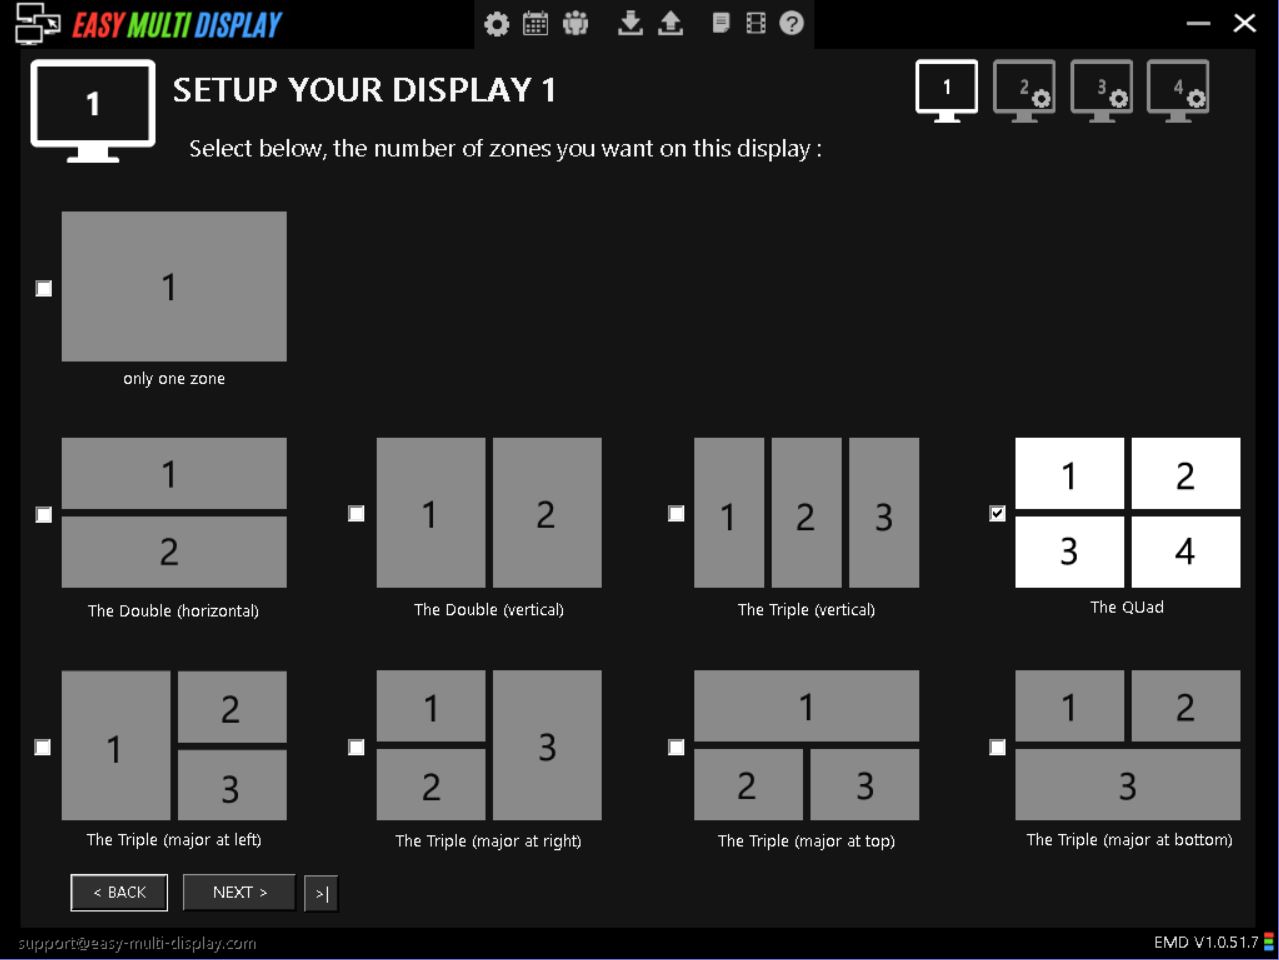 EASY MULTI DISPLAY, Step 2: Select below the number of zones you want on this display.